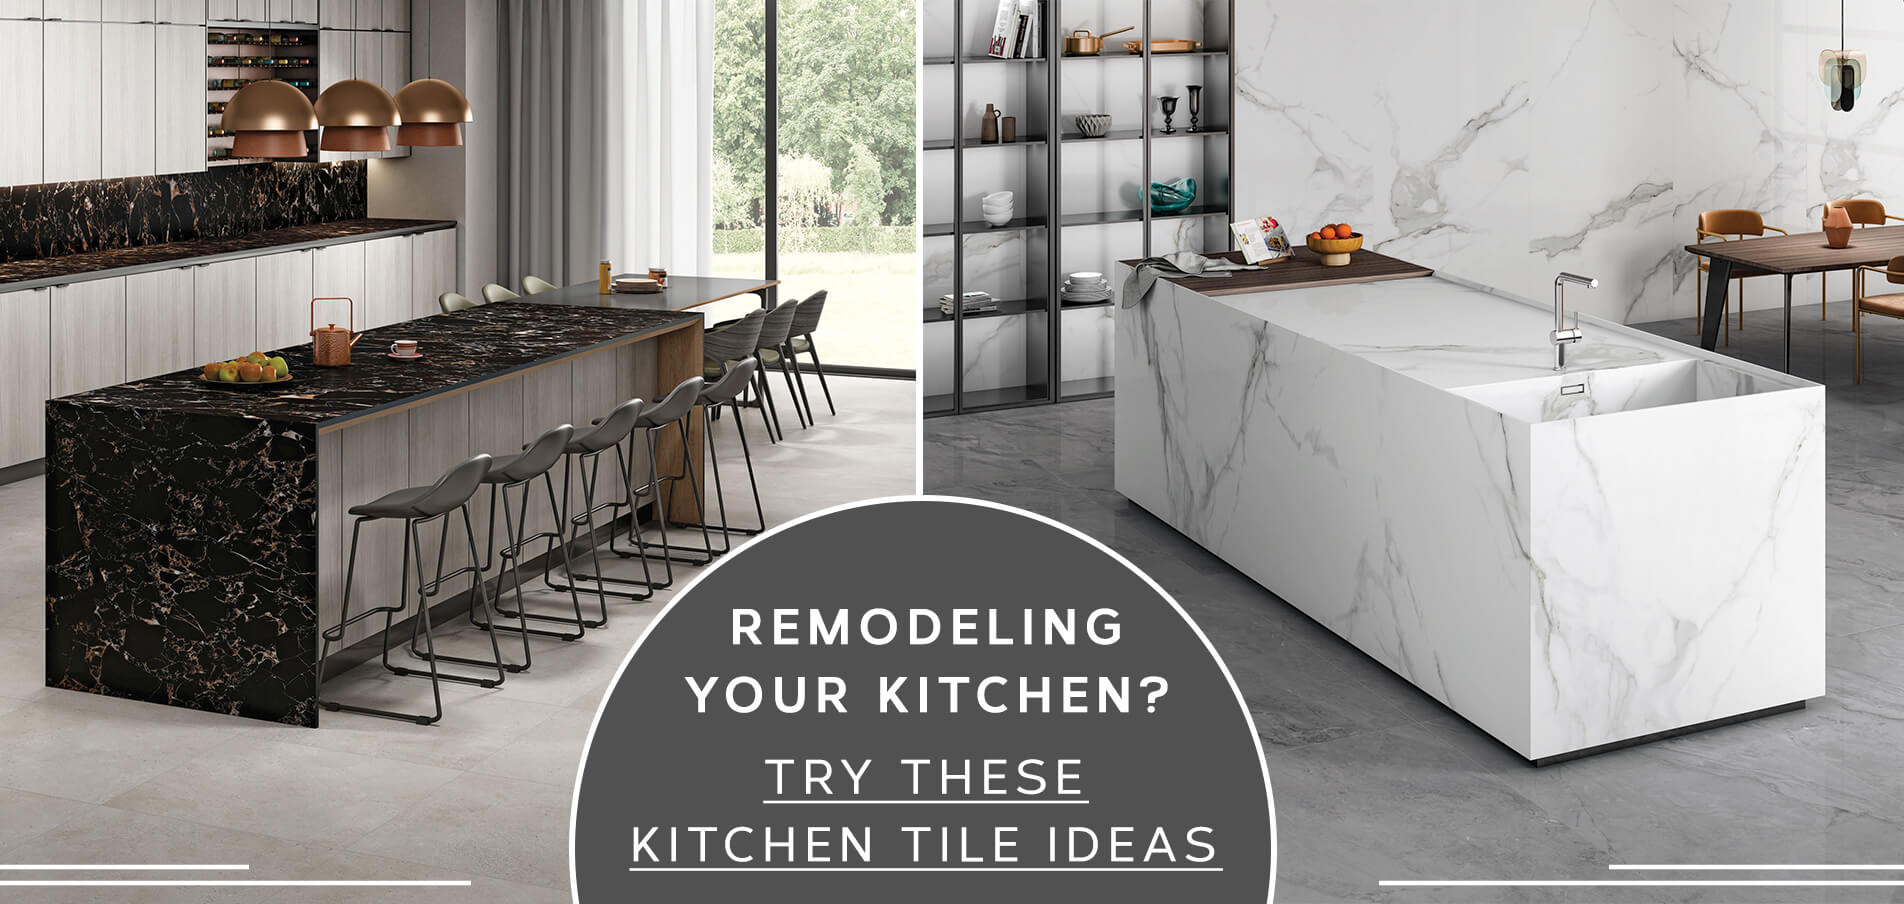 Try These Kitchen Tile Ideas for Remodeling Your Kitchen